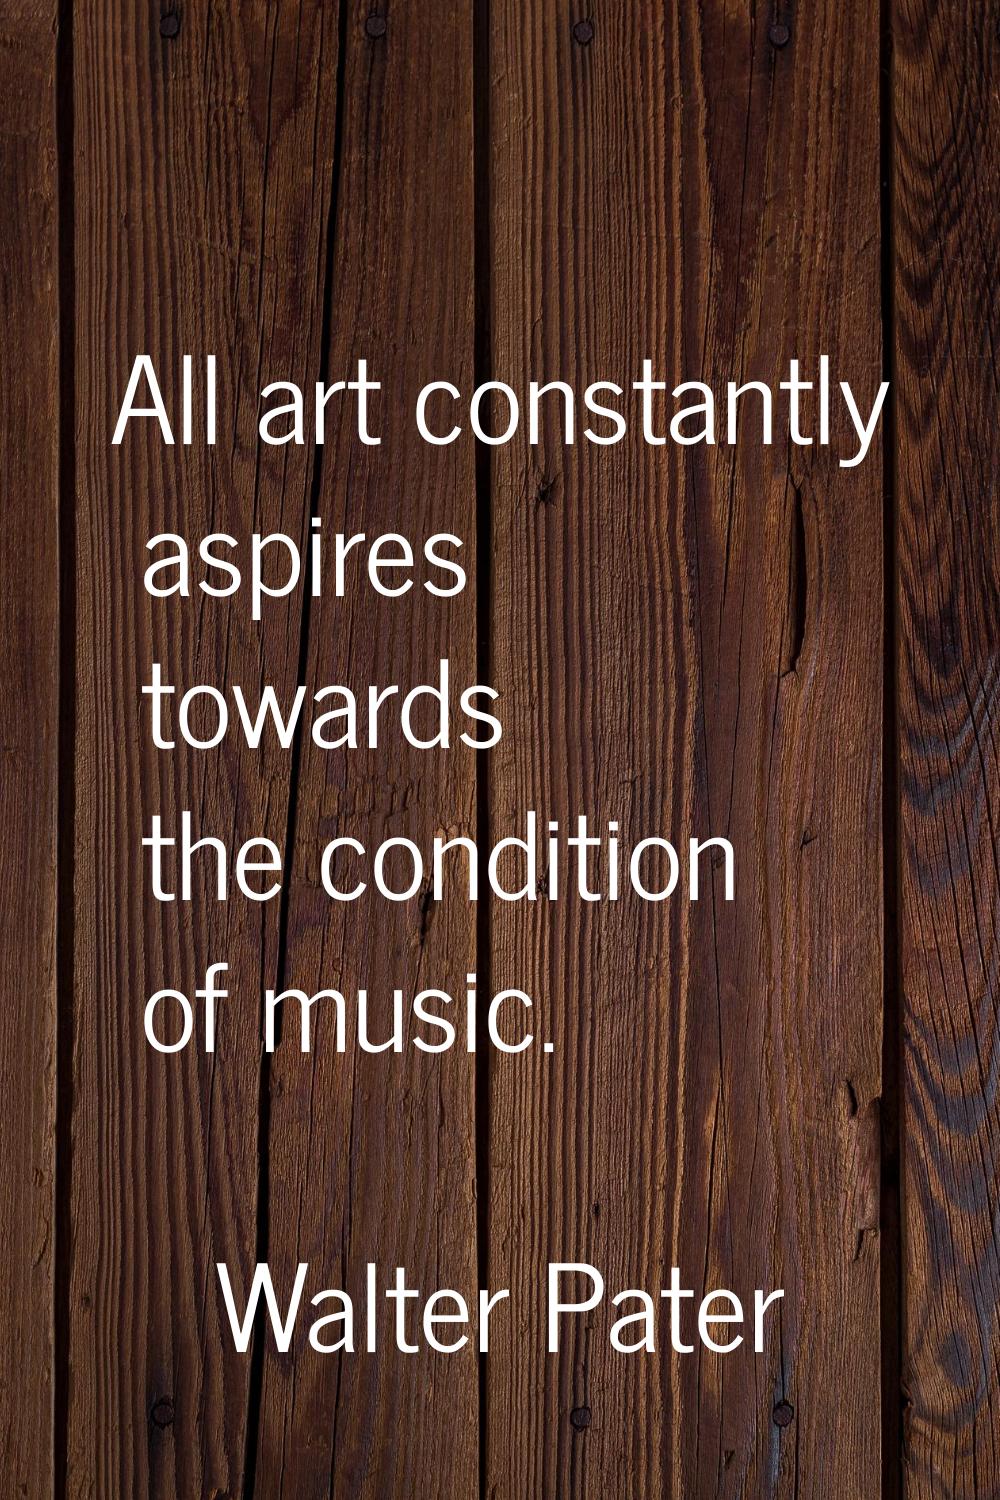 All art constantly aspires towards the condition of music.